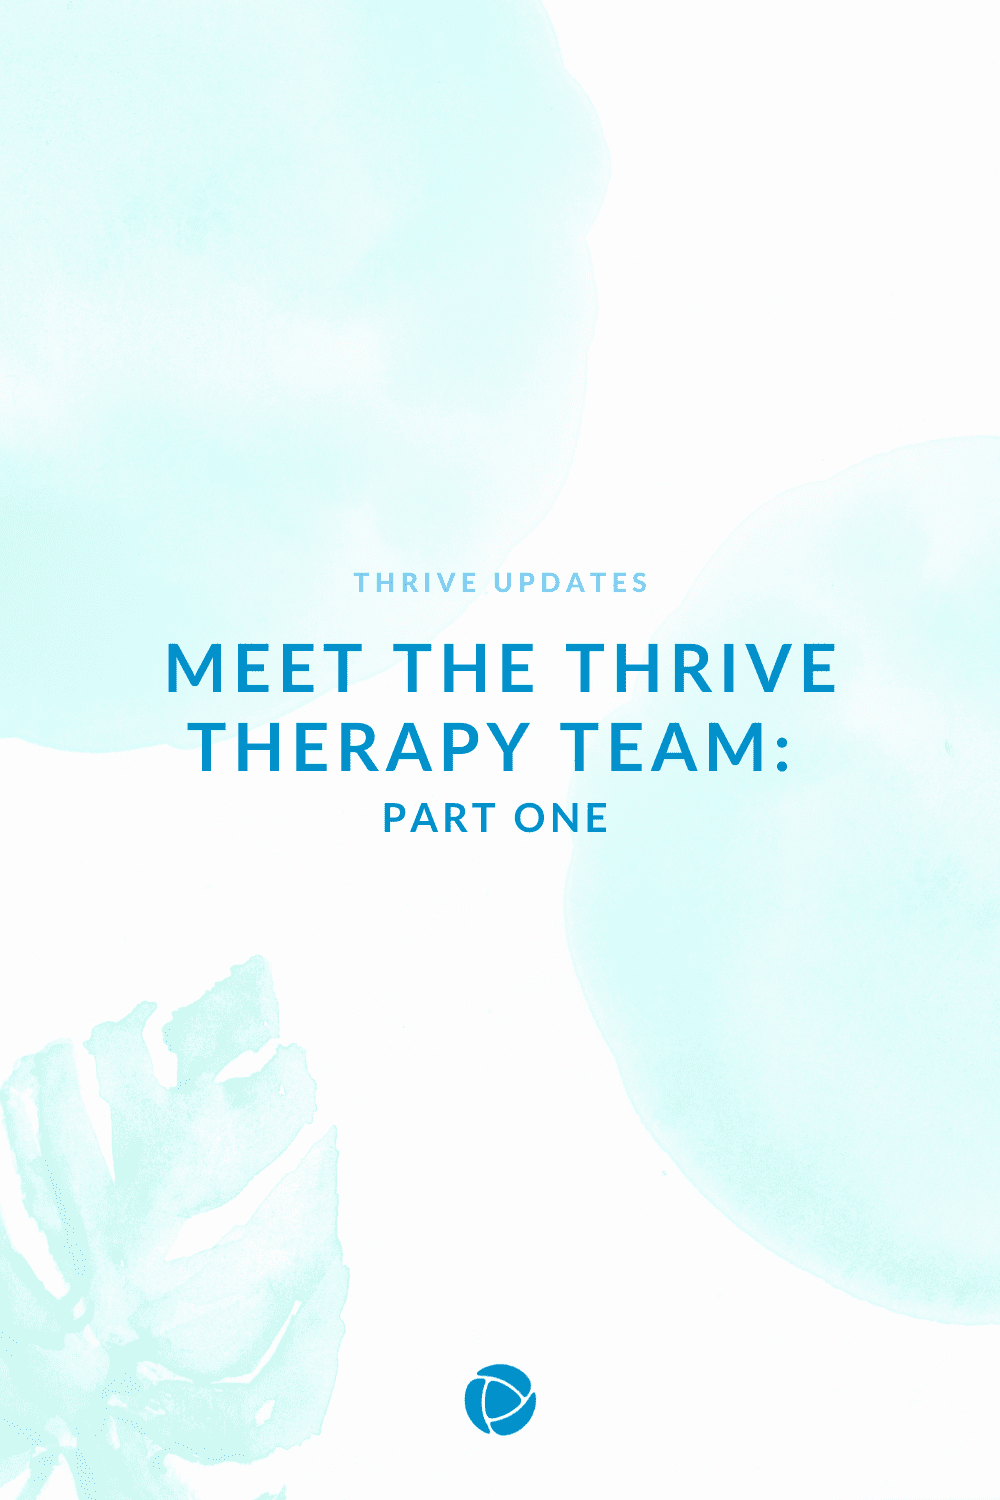 Meet the Thrive therapy team: Part one